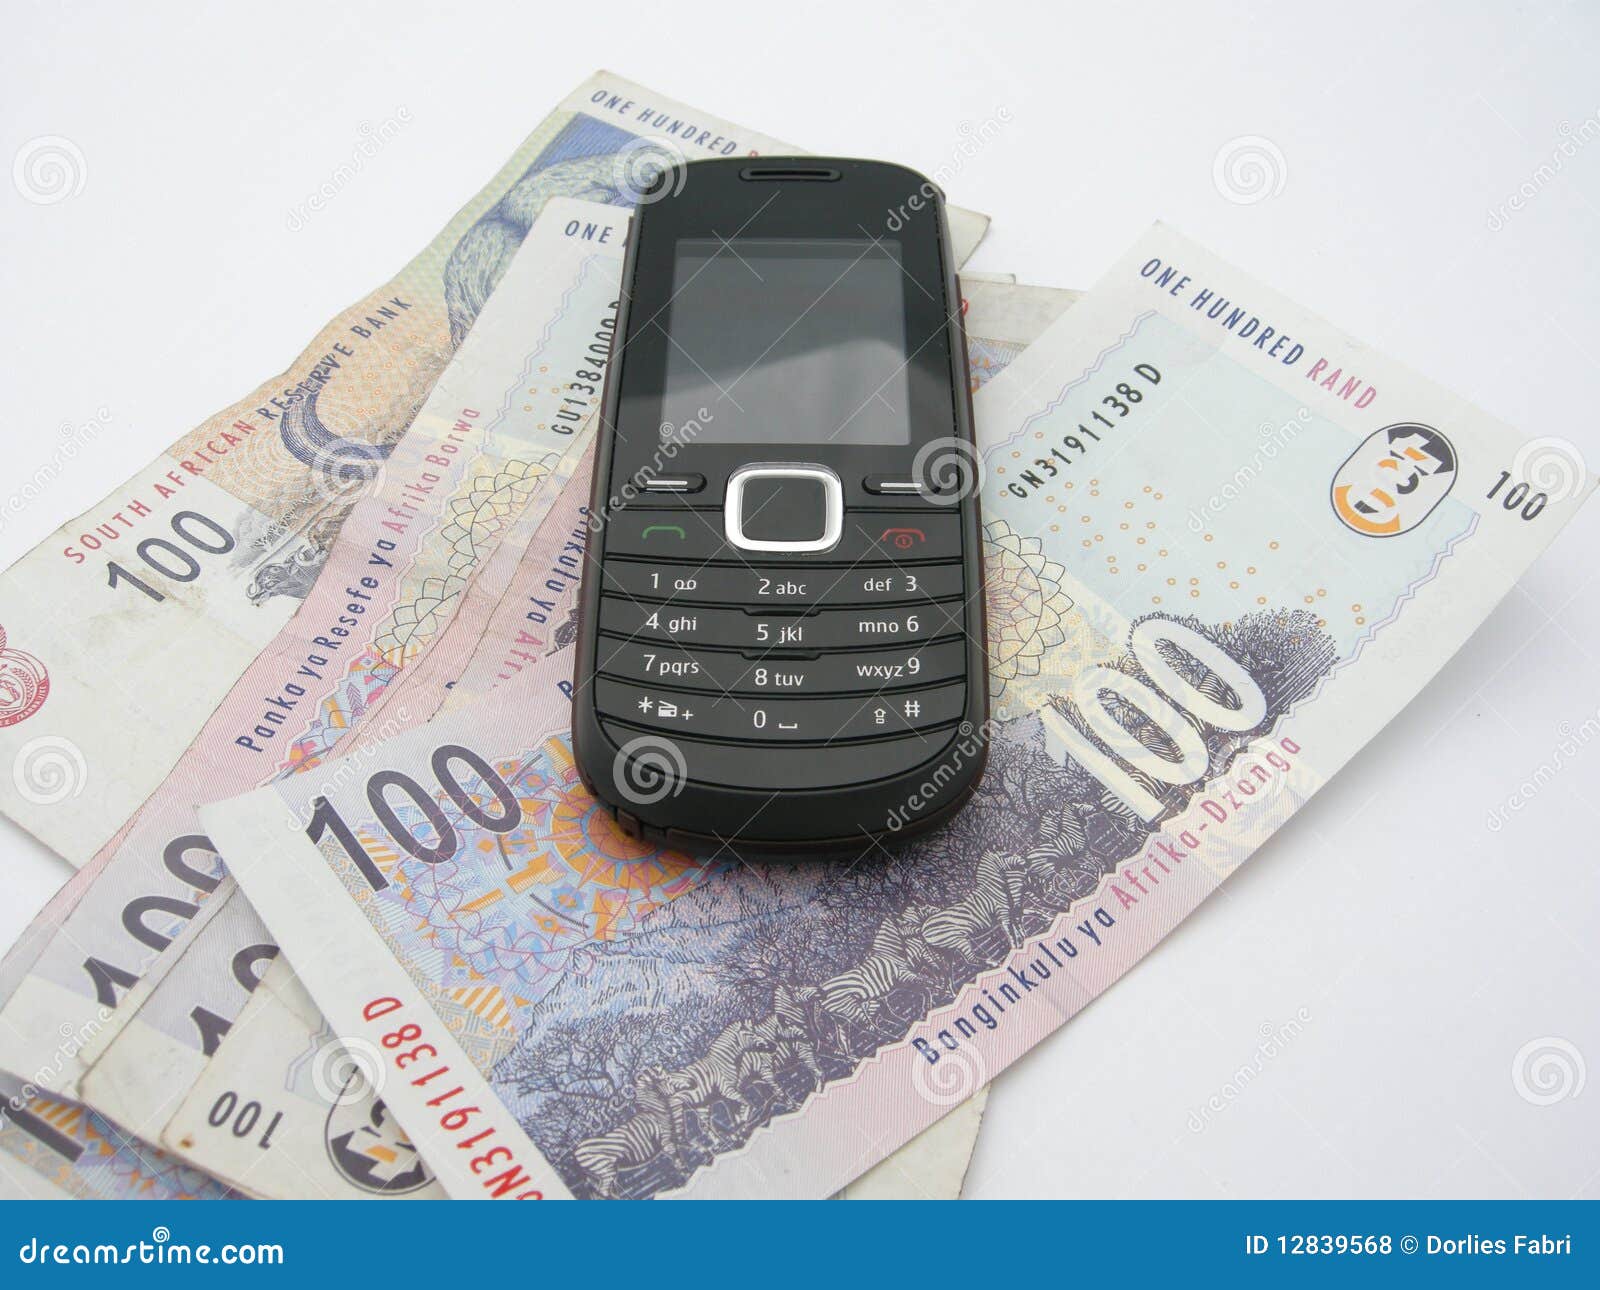 mobile phone on rands